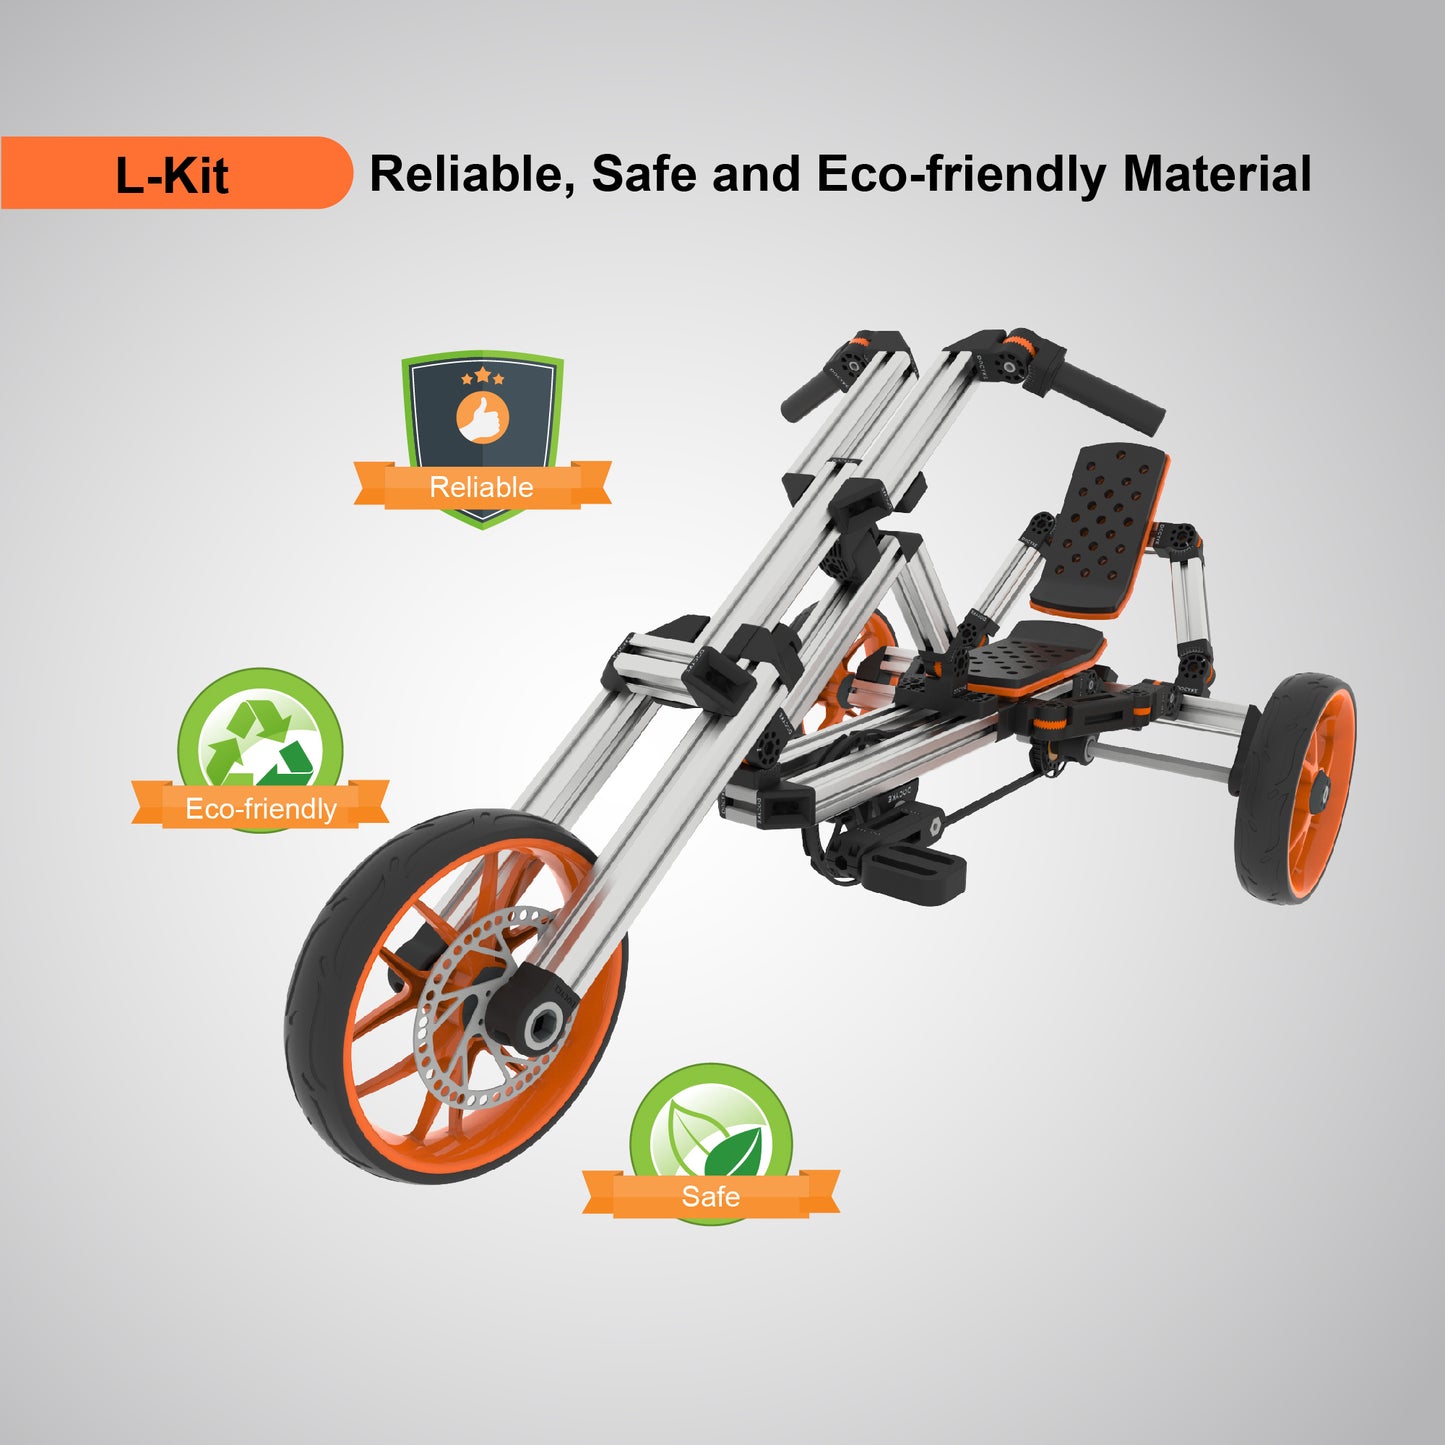 KidRock Buildable Kit 20 in 1 Kids Go Kart Set, Suitable for 1 to 8 Years Old, Two Wheel Bike, Three Wheel Bike, Go Kart, Sit/Stand Scooter, etc. Most Popular L Kit (Non Electric)